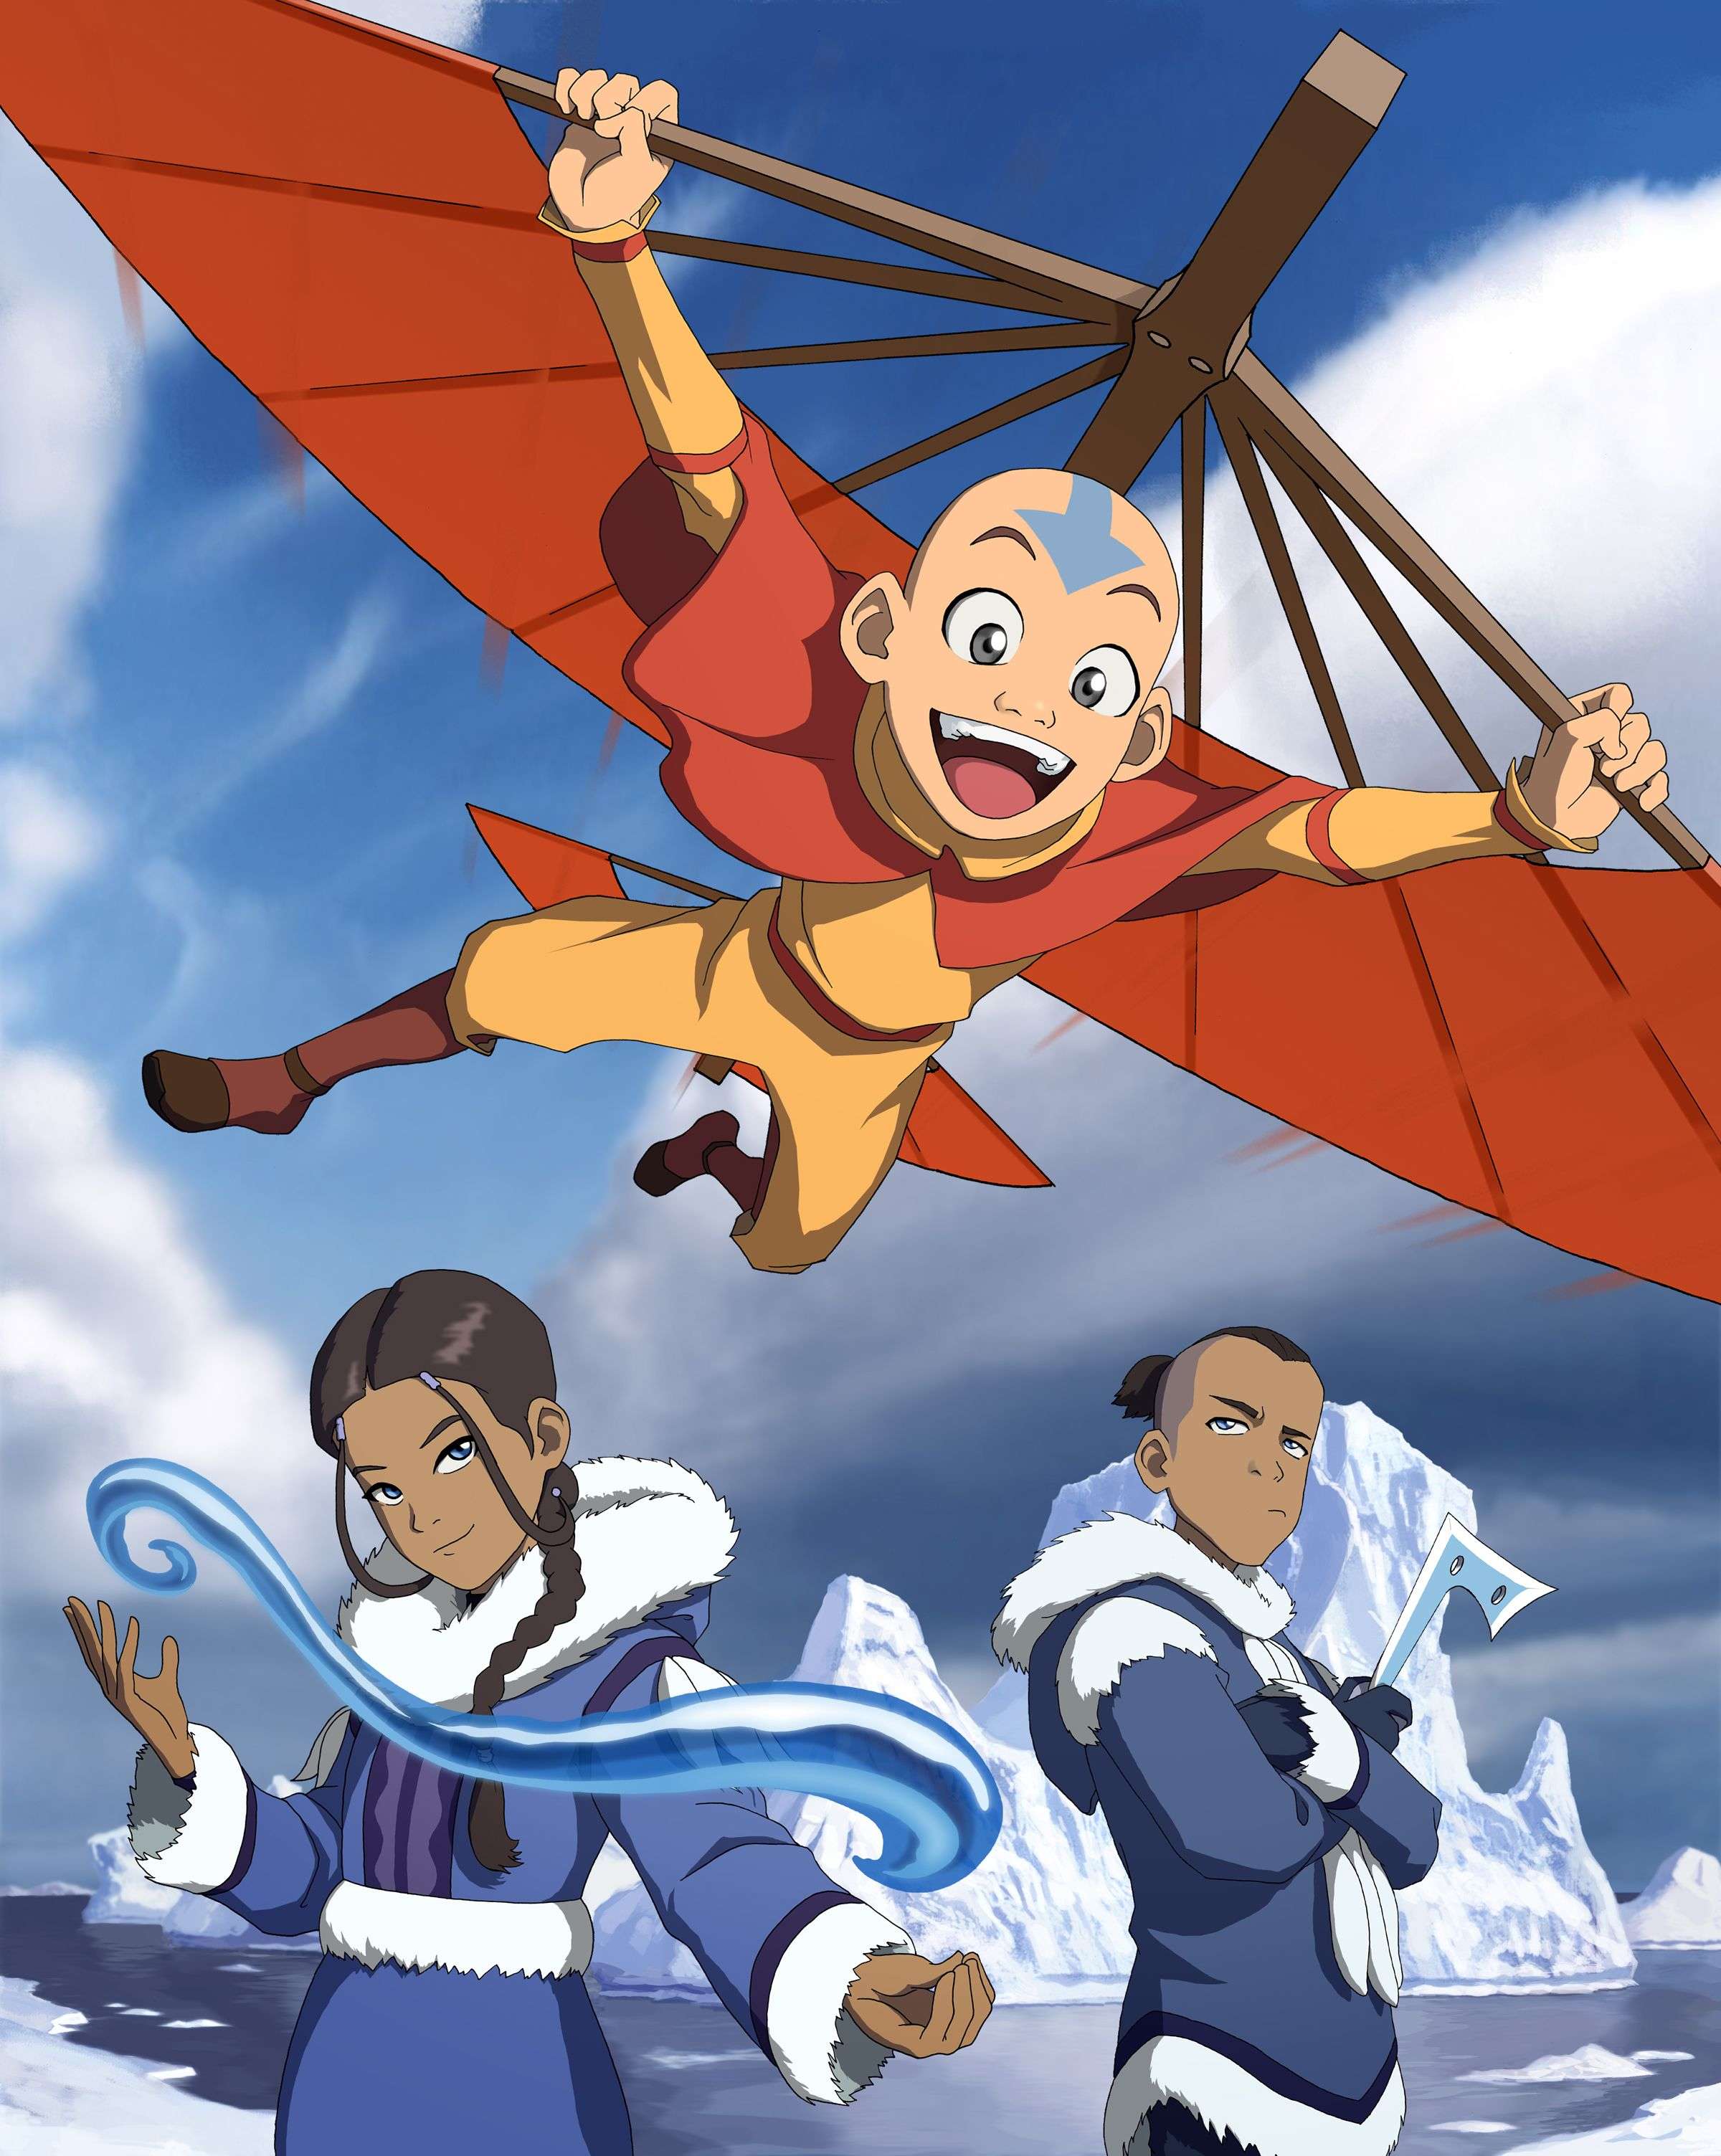 Check out the original unaired pilot of Avatar The Last Airbender on Twitch